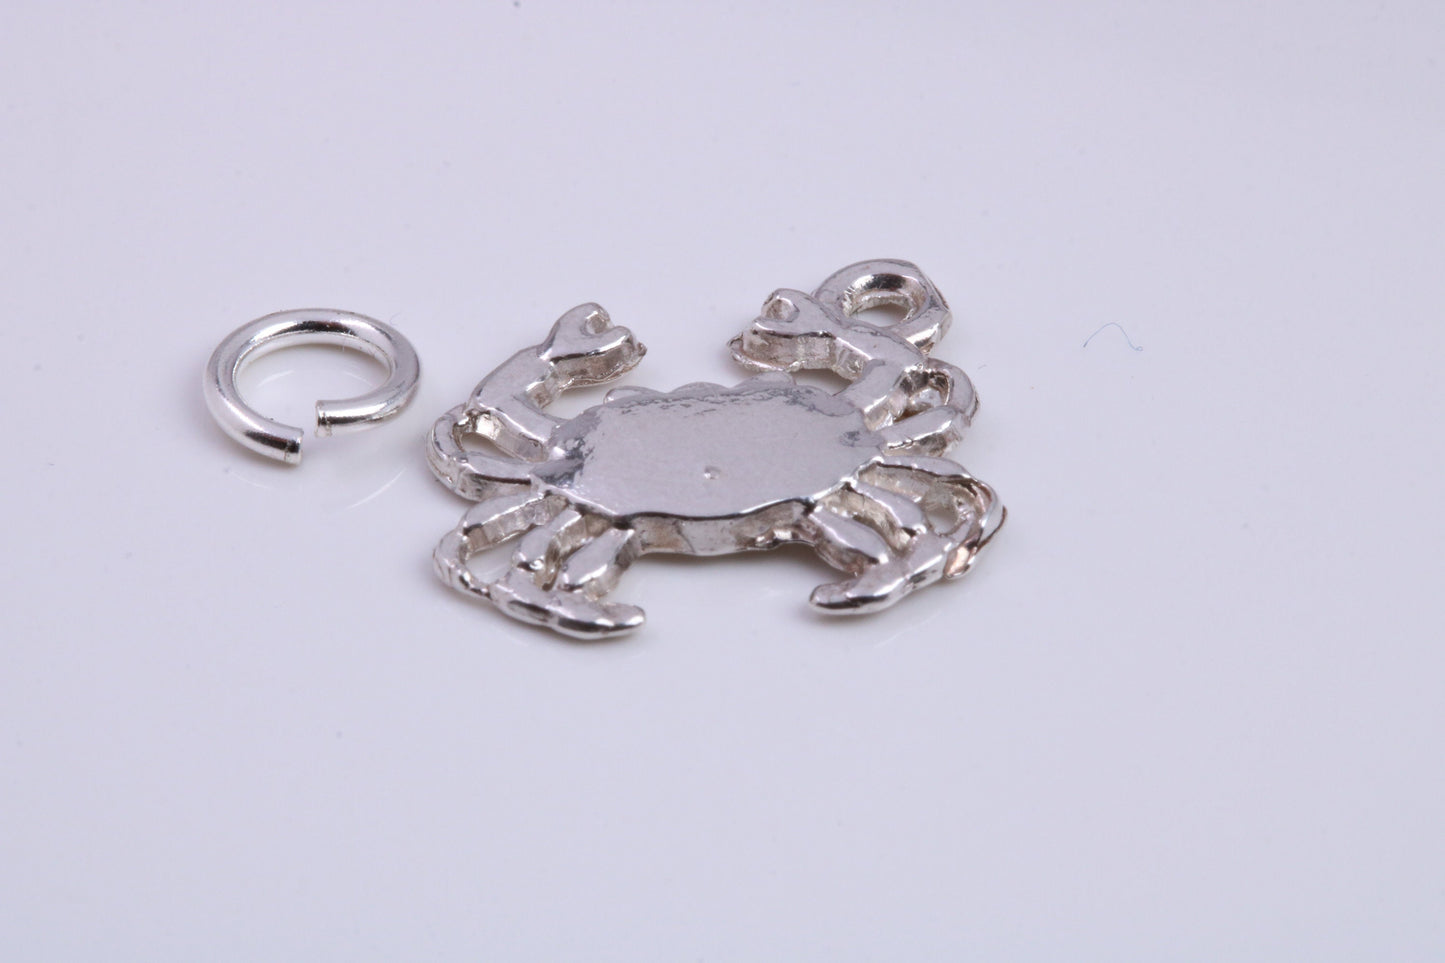 Crab Charm, Traditional Charm, Made from Solid 925 Grade Sterling Silver, Complete with Attachment Link